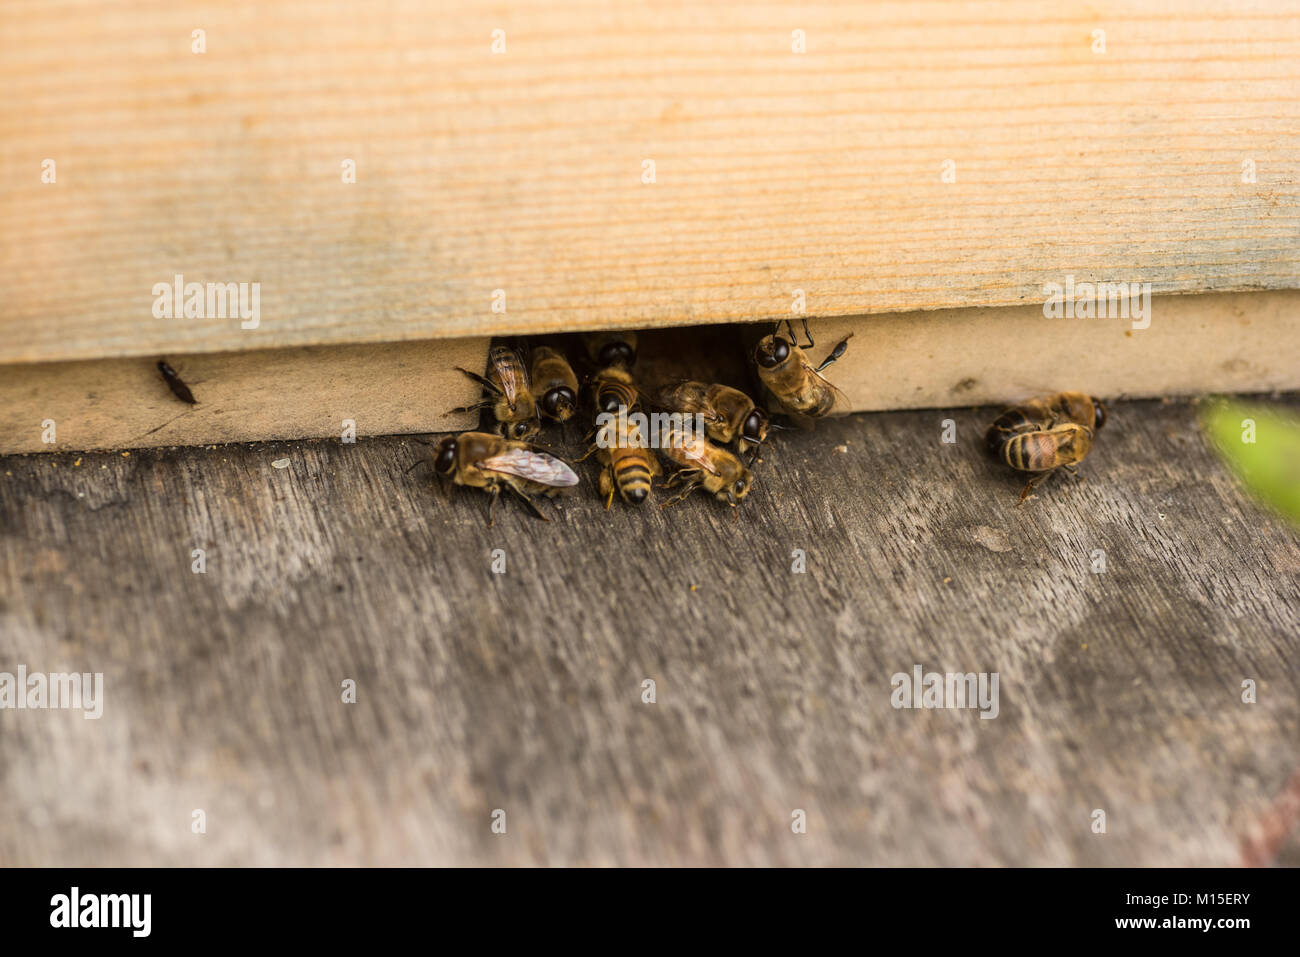 Drones and worker bees at the entrance of a hive. Stock Photo